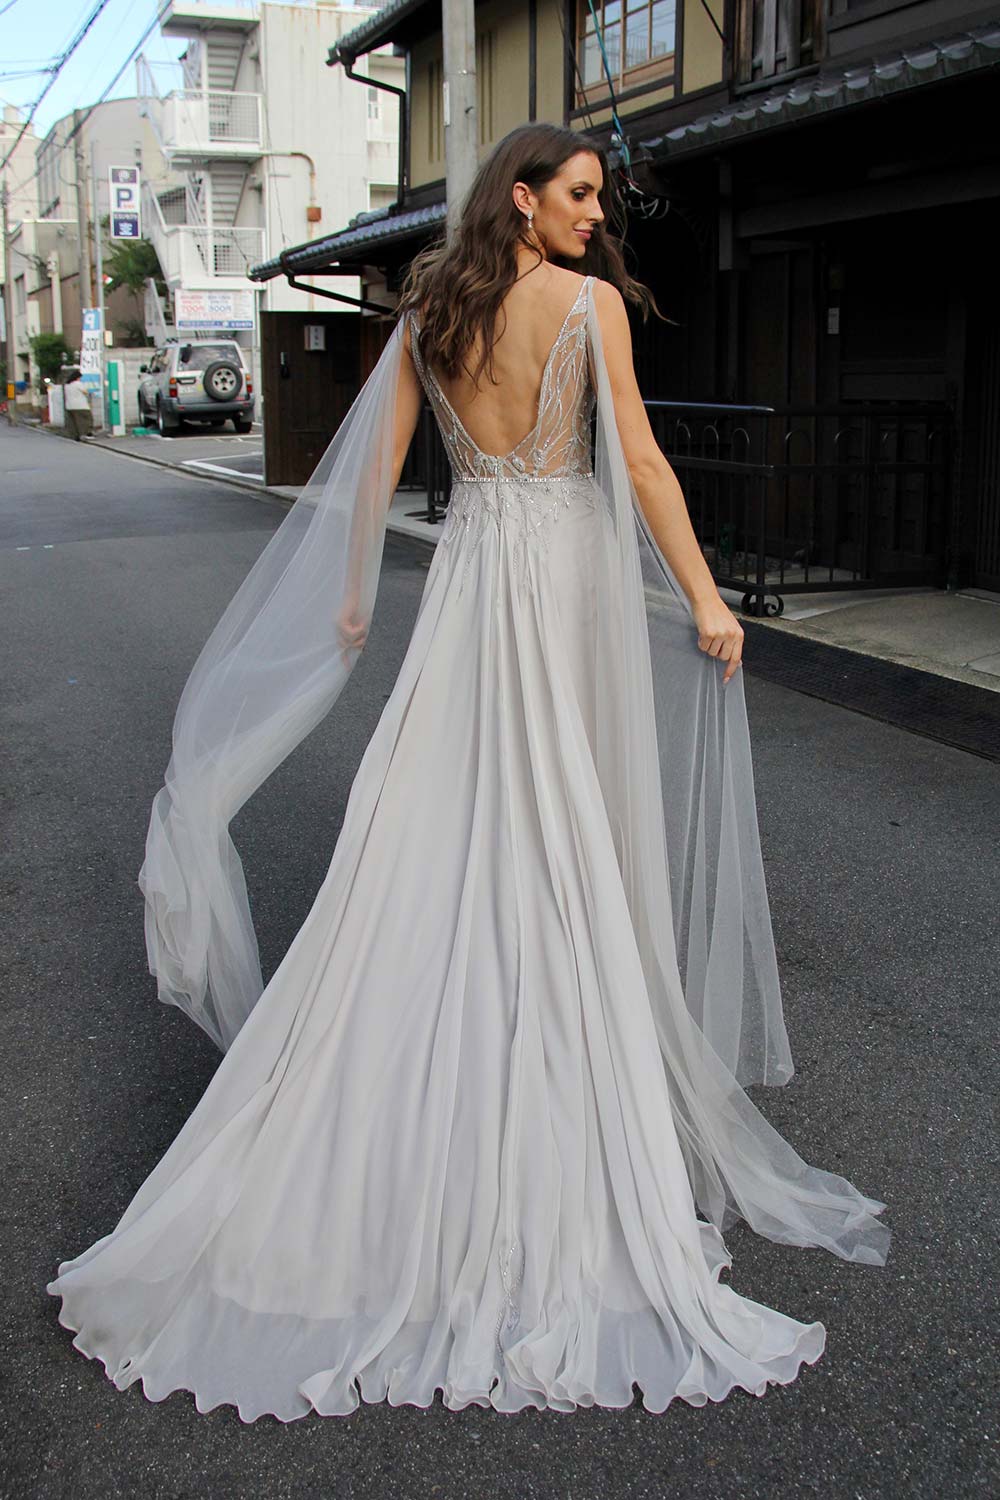 Female model wearing Vinka Design An Oriental Affair Wedding Dress. On a Japanese street the back detail of a gown with a sheer, deep v-neckline bodice with swarovski diamante belt, tulle cape and silver silk chiffon skirt.